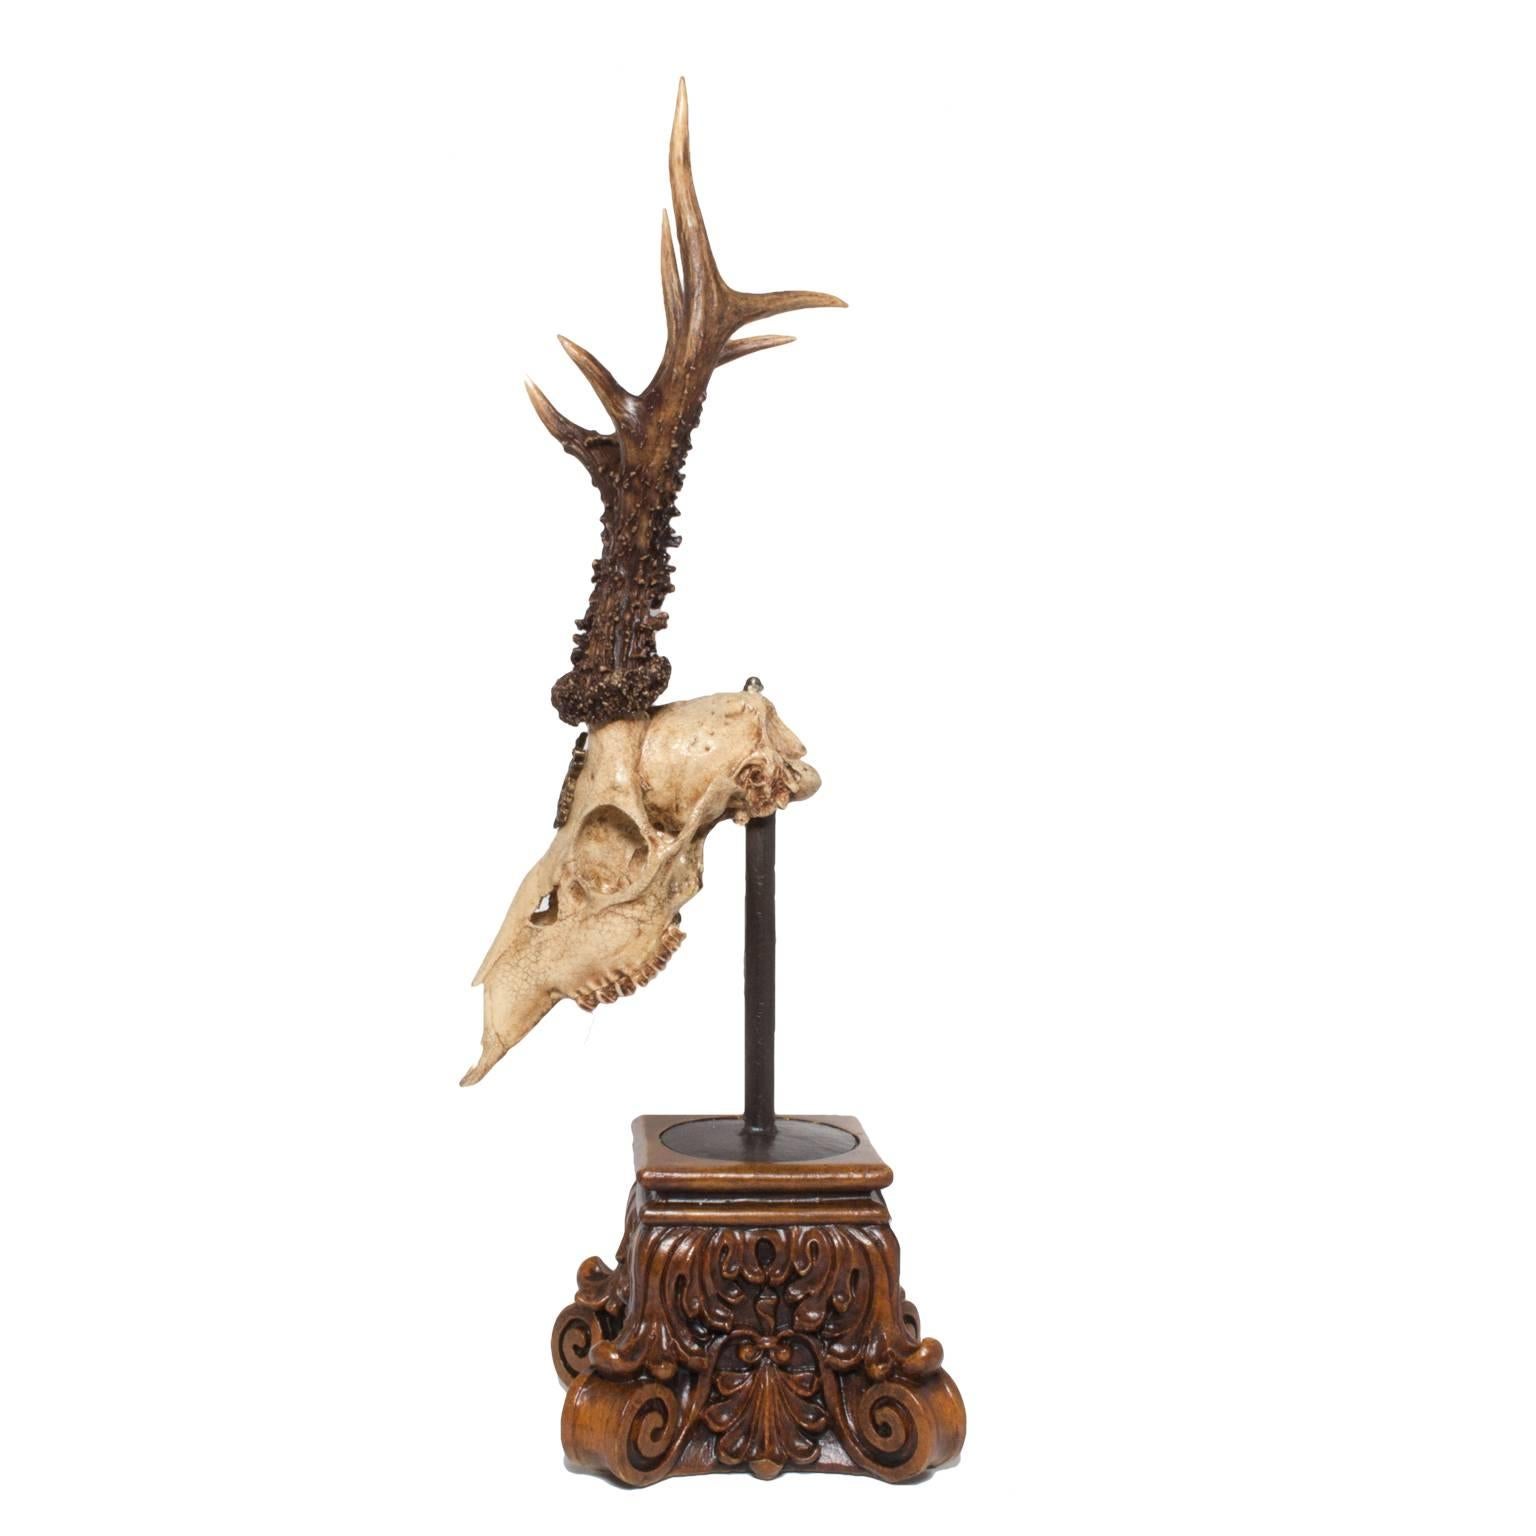 19th century roe deer trophy on Stand with the original badge of König (King) Wilhelm of Württemberg, Germany. One of six available and measures 21